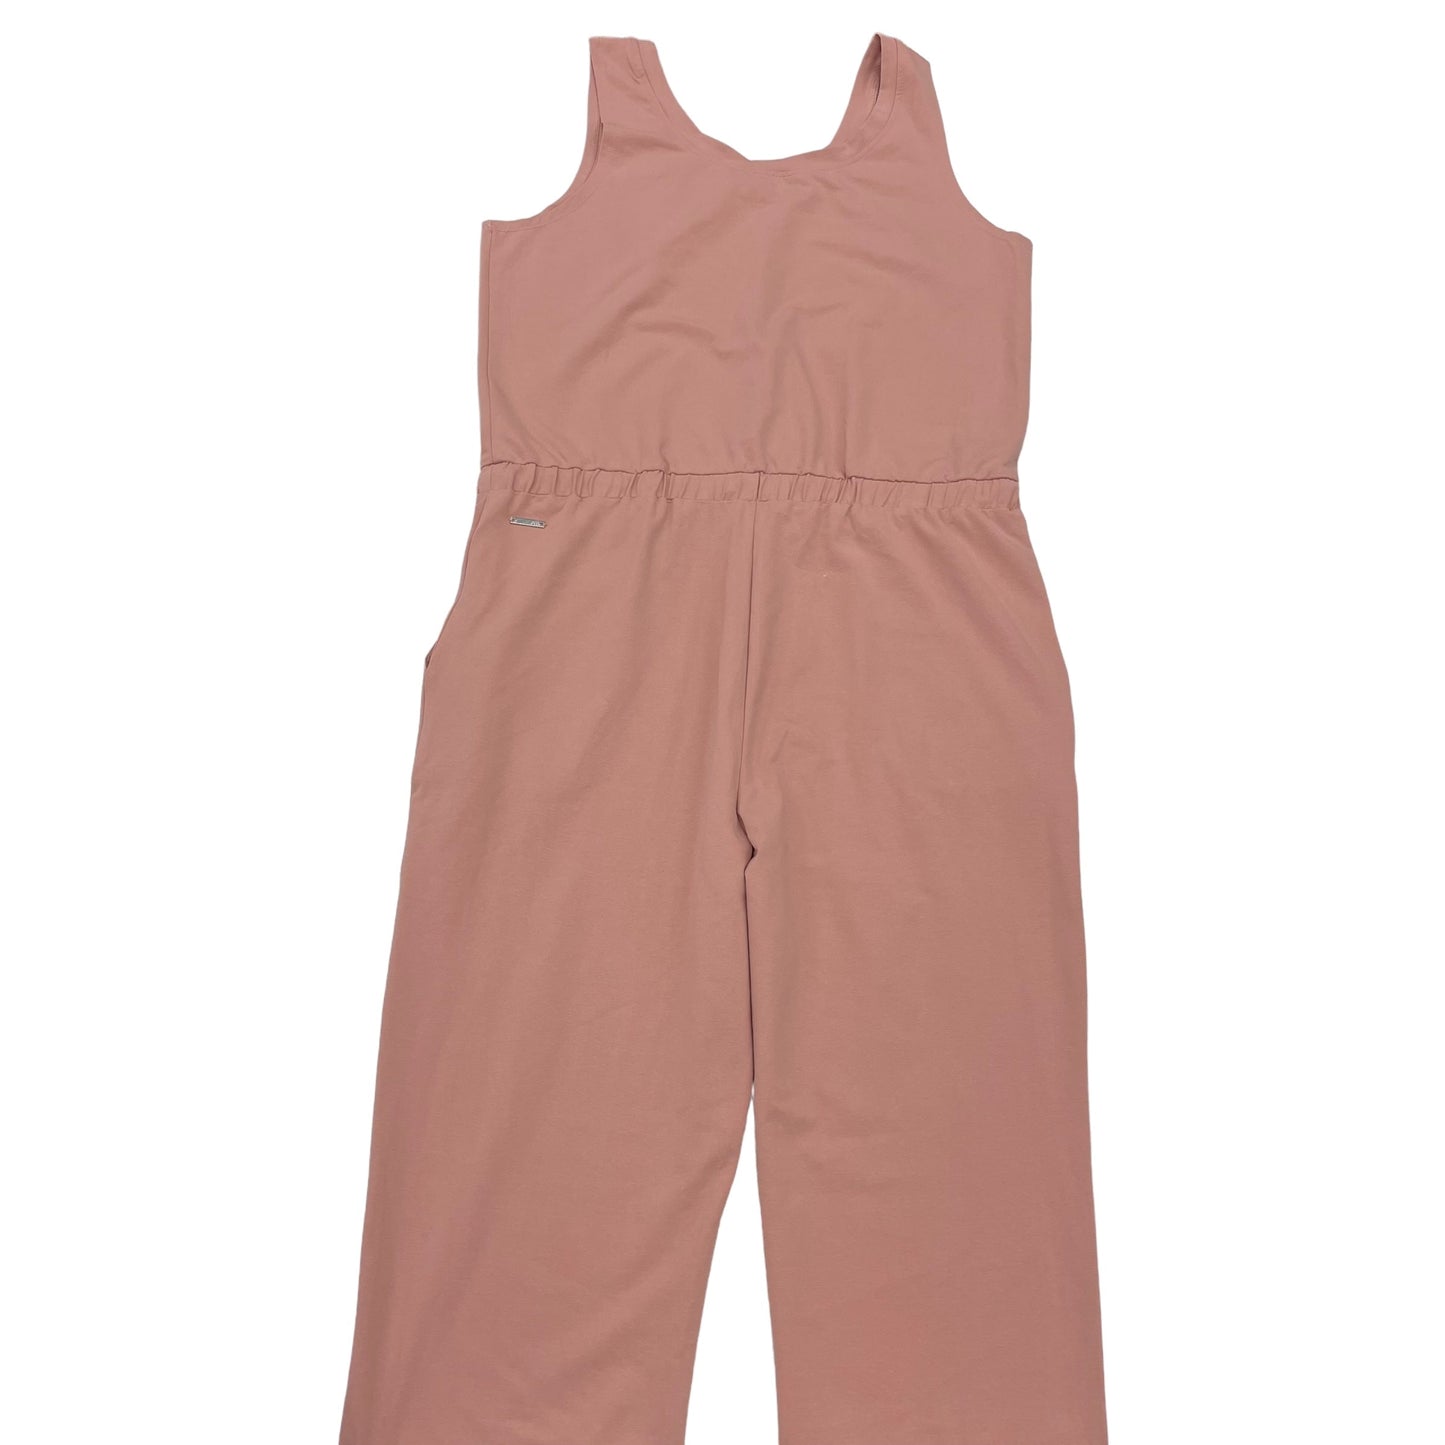 PINK JUMPSUIT by ANDREW MARC Size:L